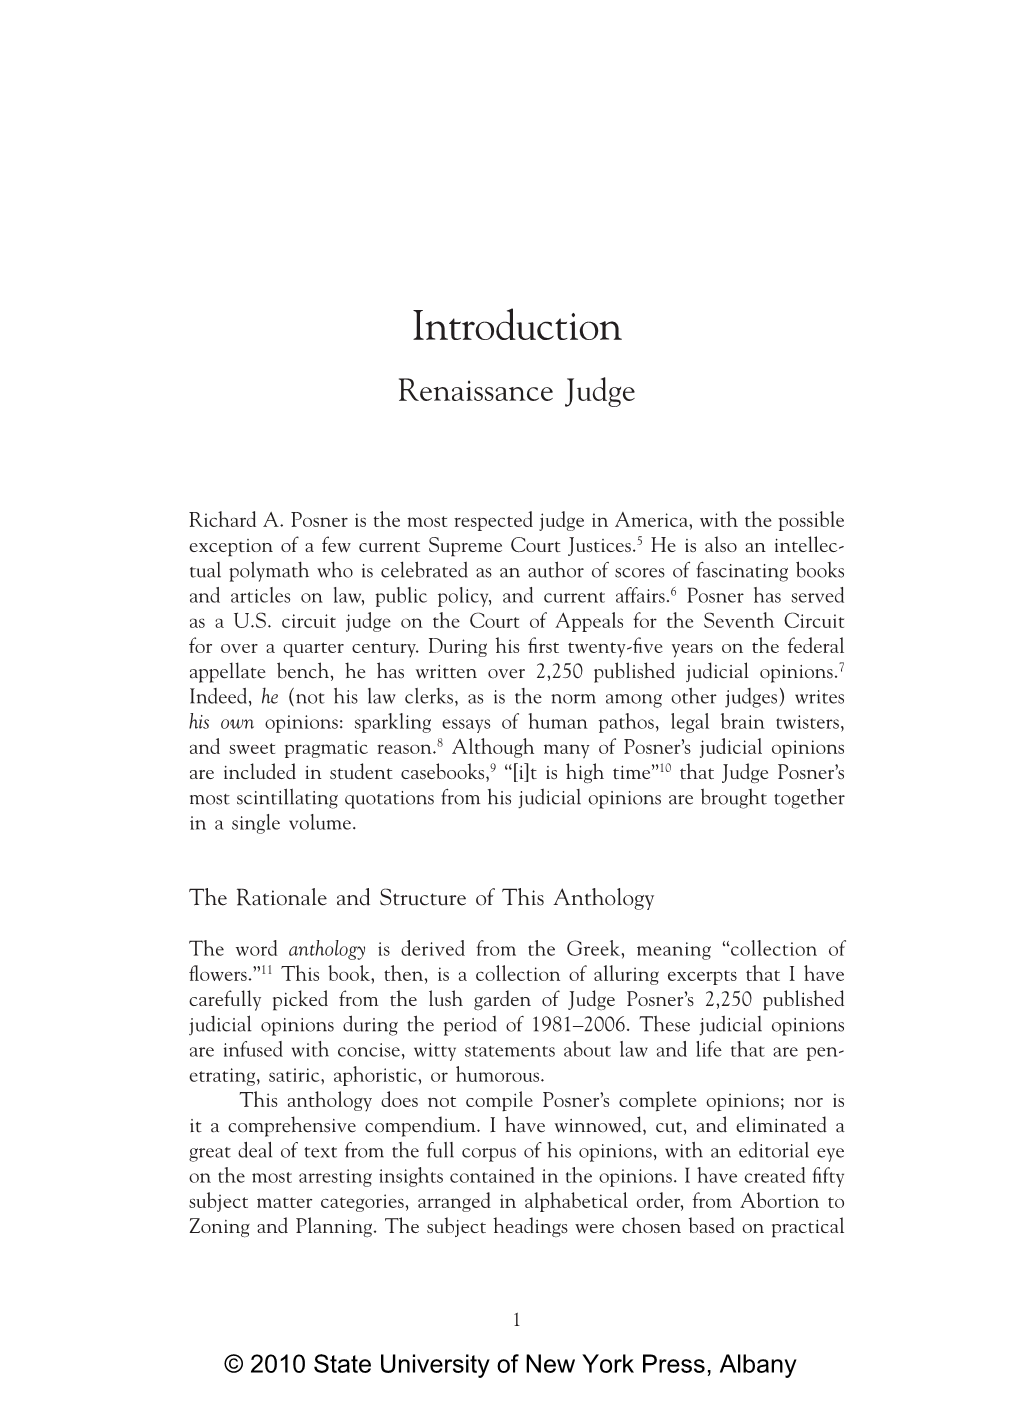 The Quotable Judge Posner Ease of Reference; to Avoid Confusion, Subheadings Are Avoided